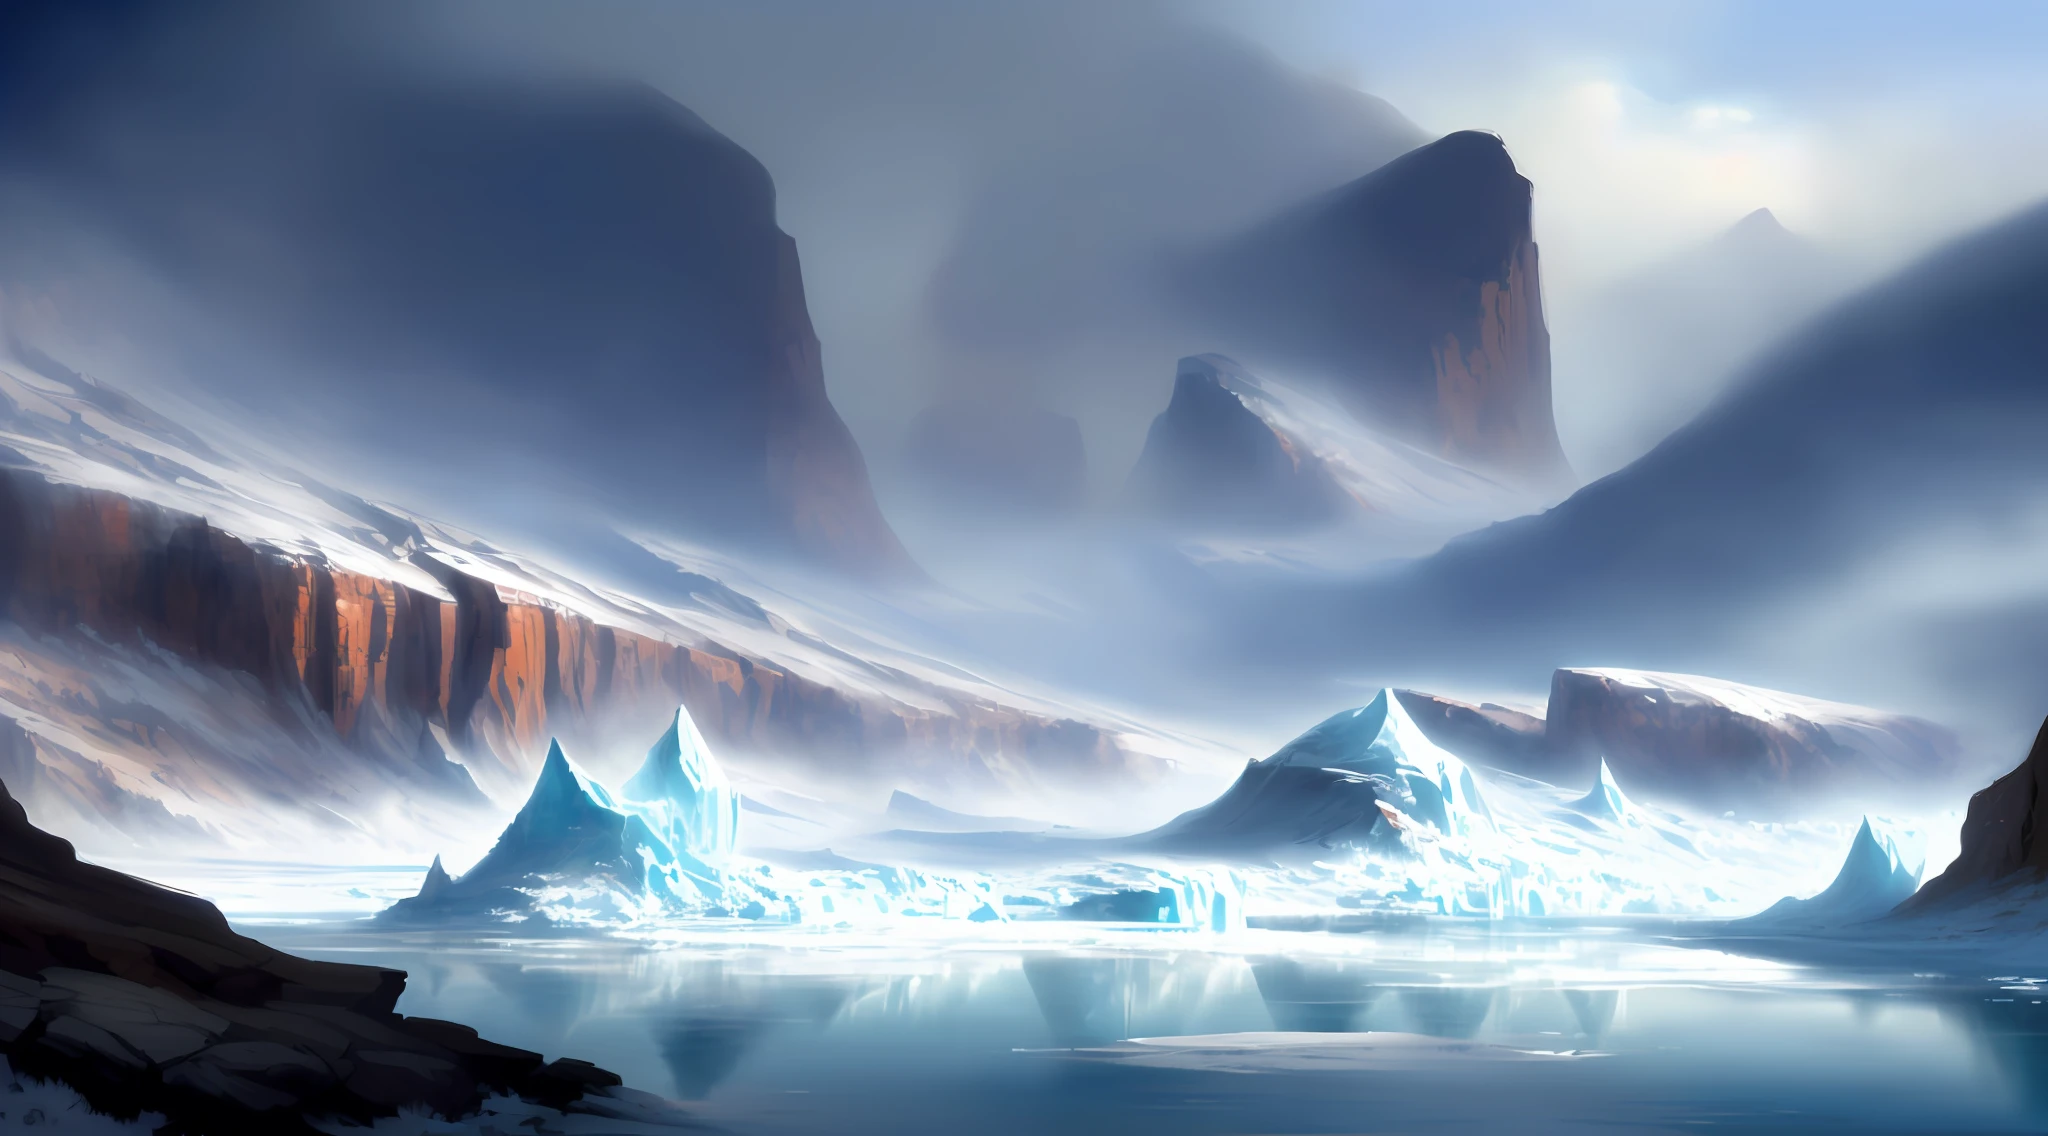 There is a painting of a mountain with a river inside, environmental painting, conceptual art. epic landscape, concept art, environmental art, environmental concept art, beautiful detailed concept art, bastian grevett, canyon background, earth warming and canyon, detailed digital concept art, digital painting concept art, environmental design illustration, detailed digital painting, concept art highly detailed, (((Ice age)))